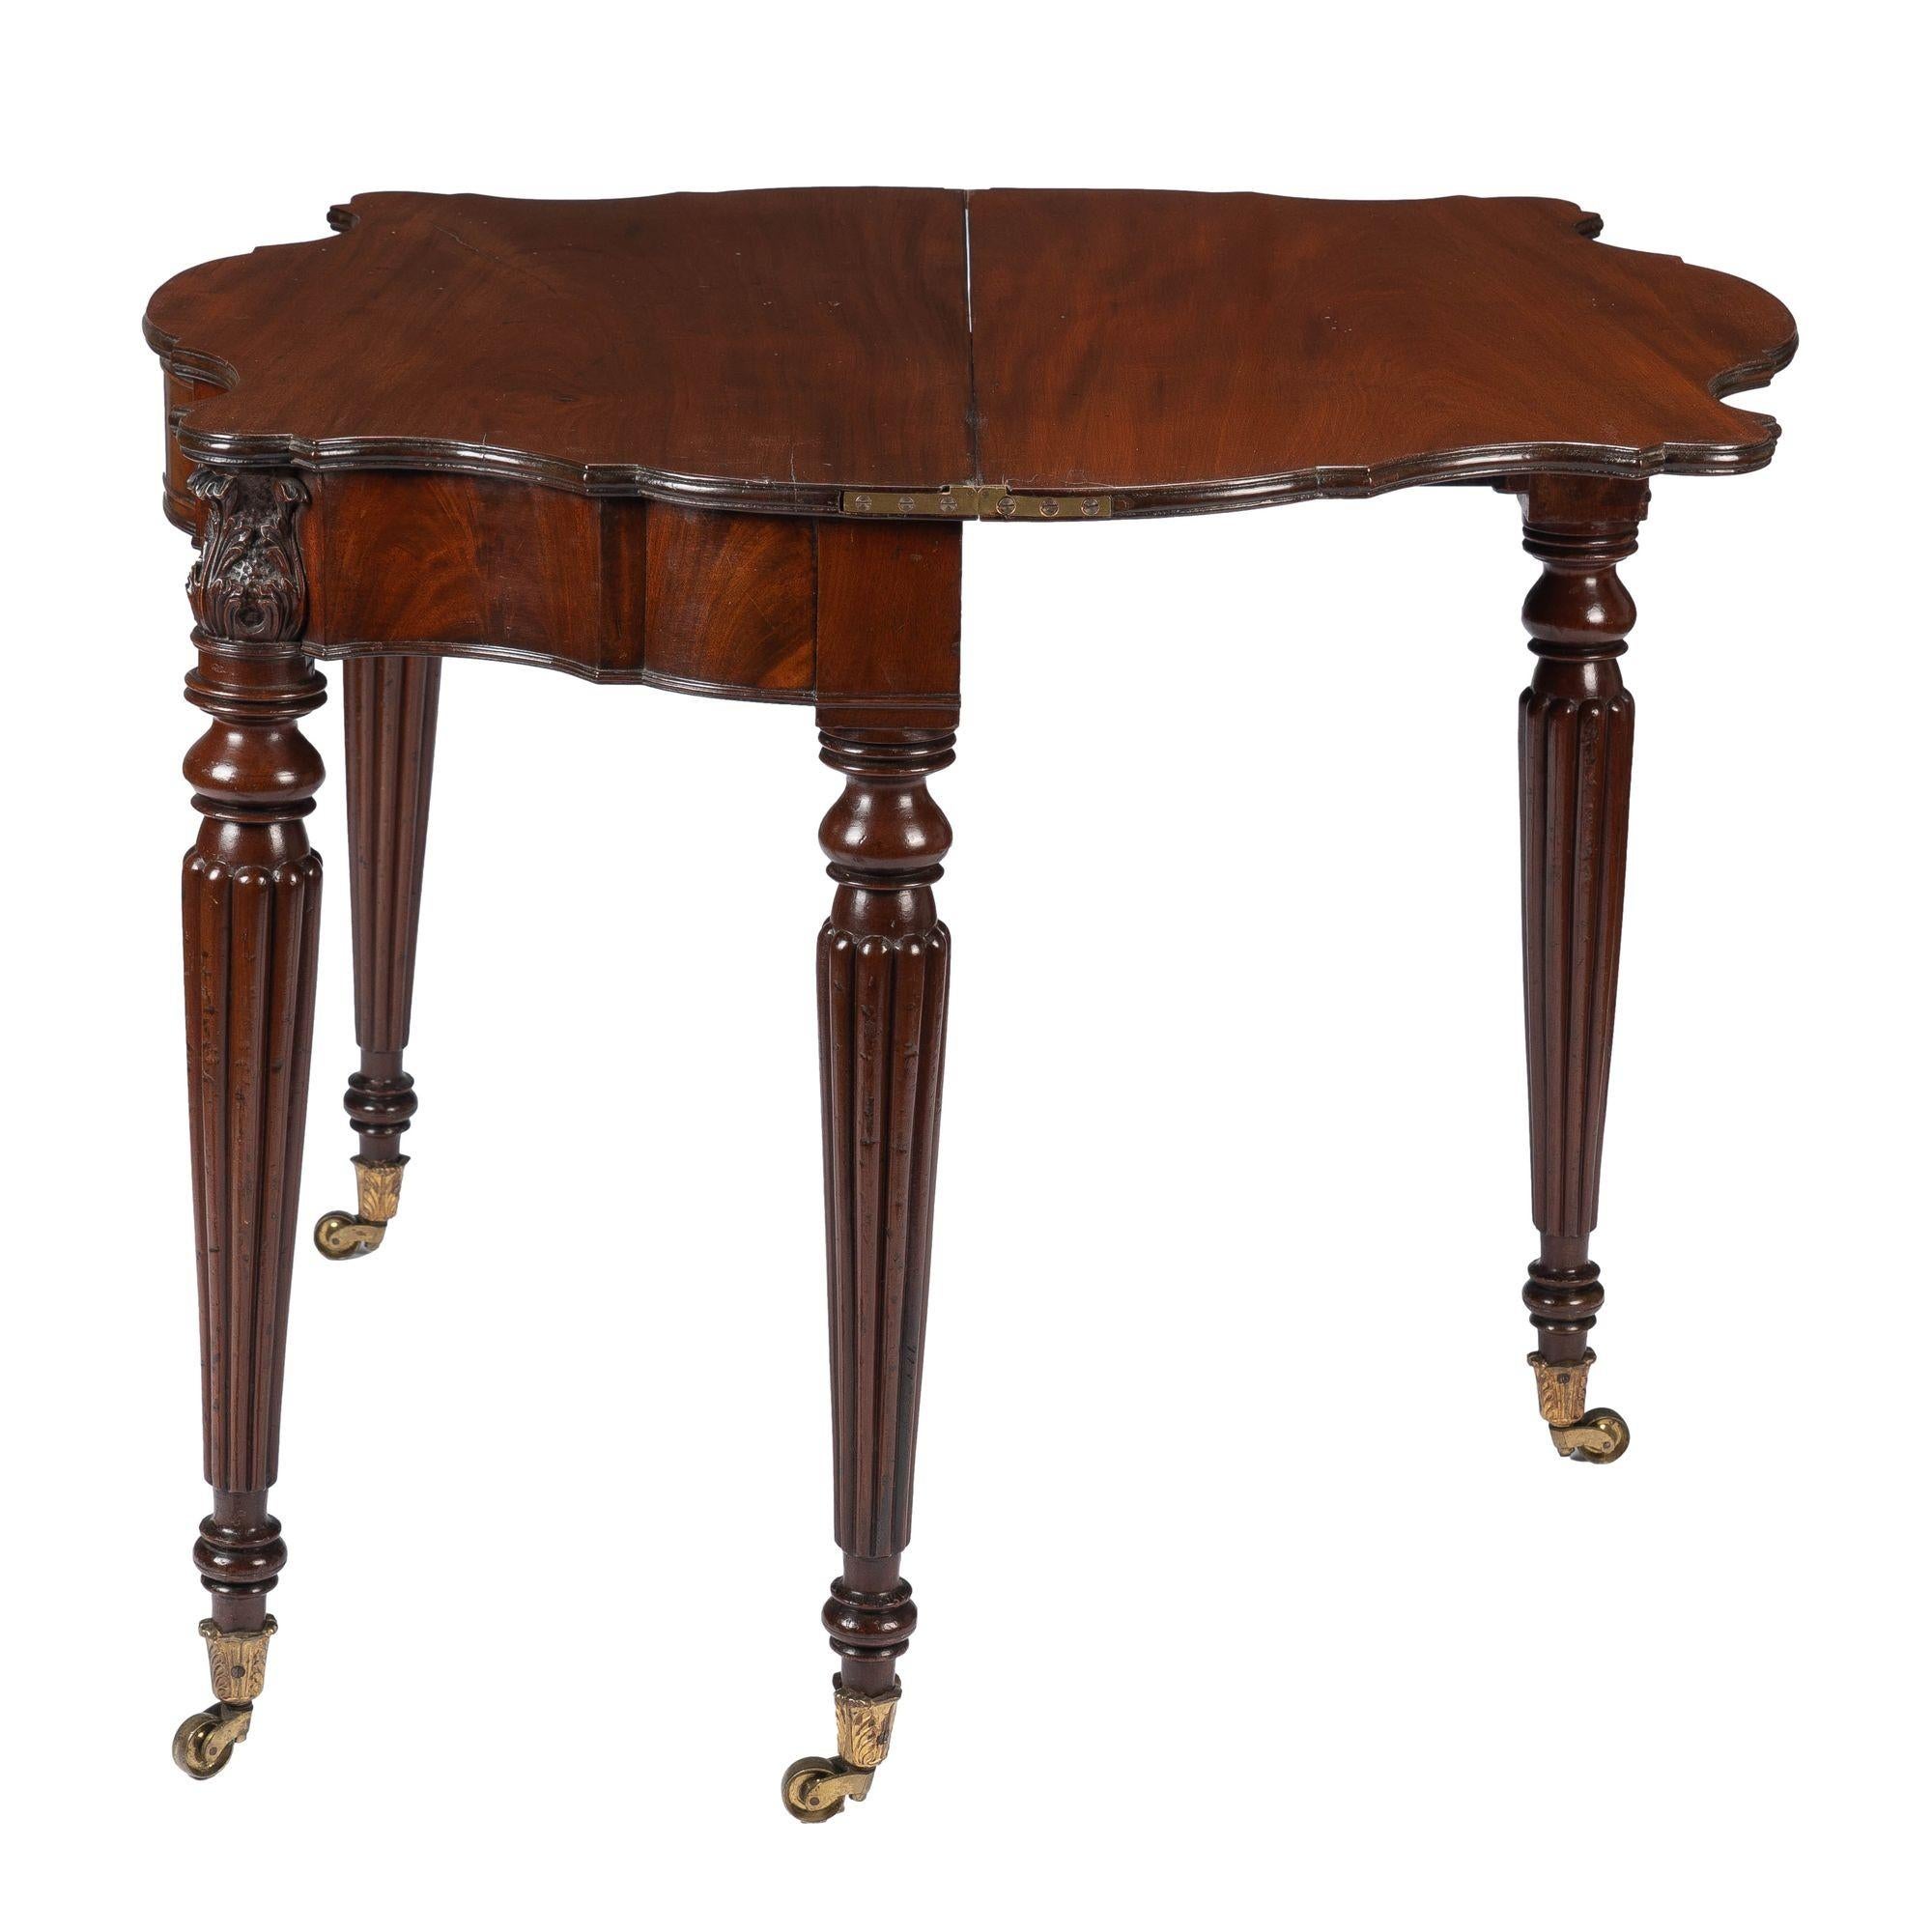 Samuel Field Macintire Attributed Mahogany Flip Top Game Table, c. 1810-15 For Sale 4